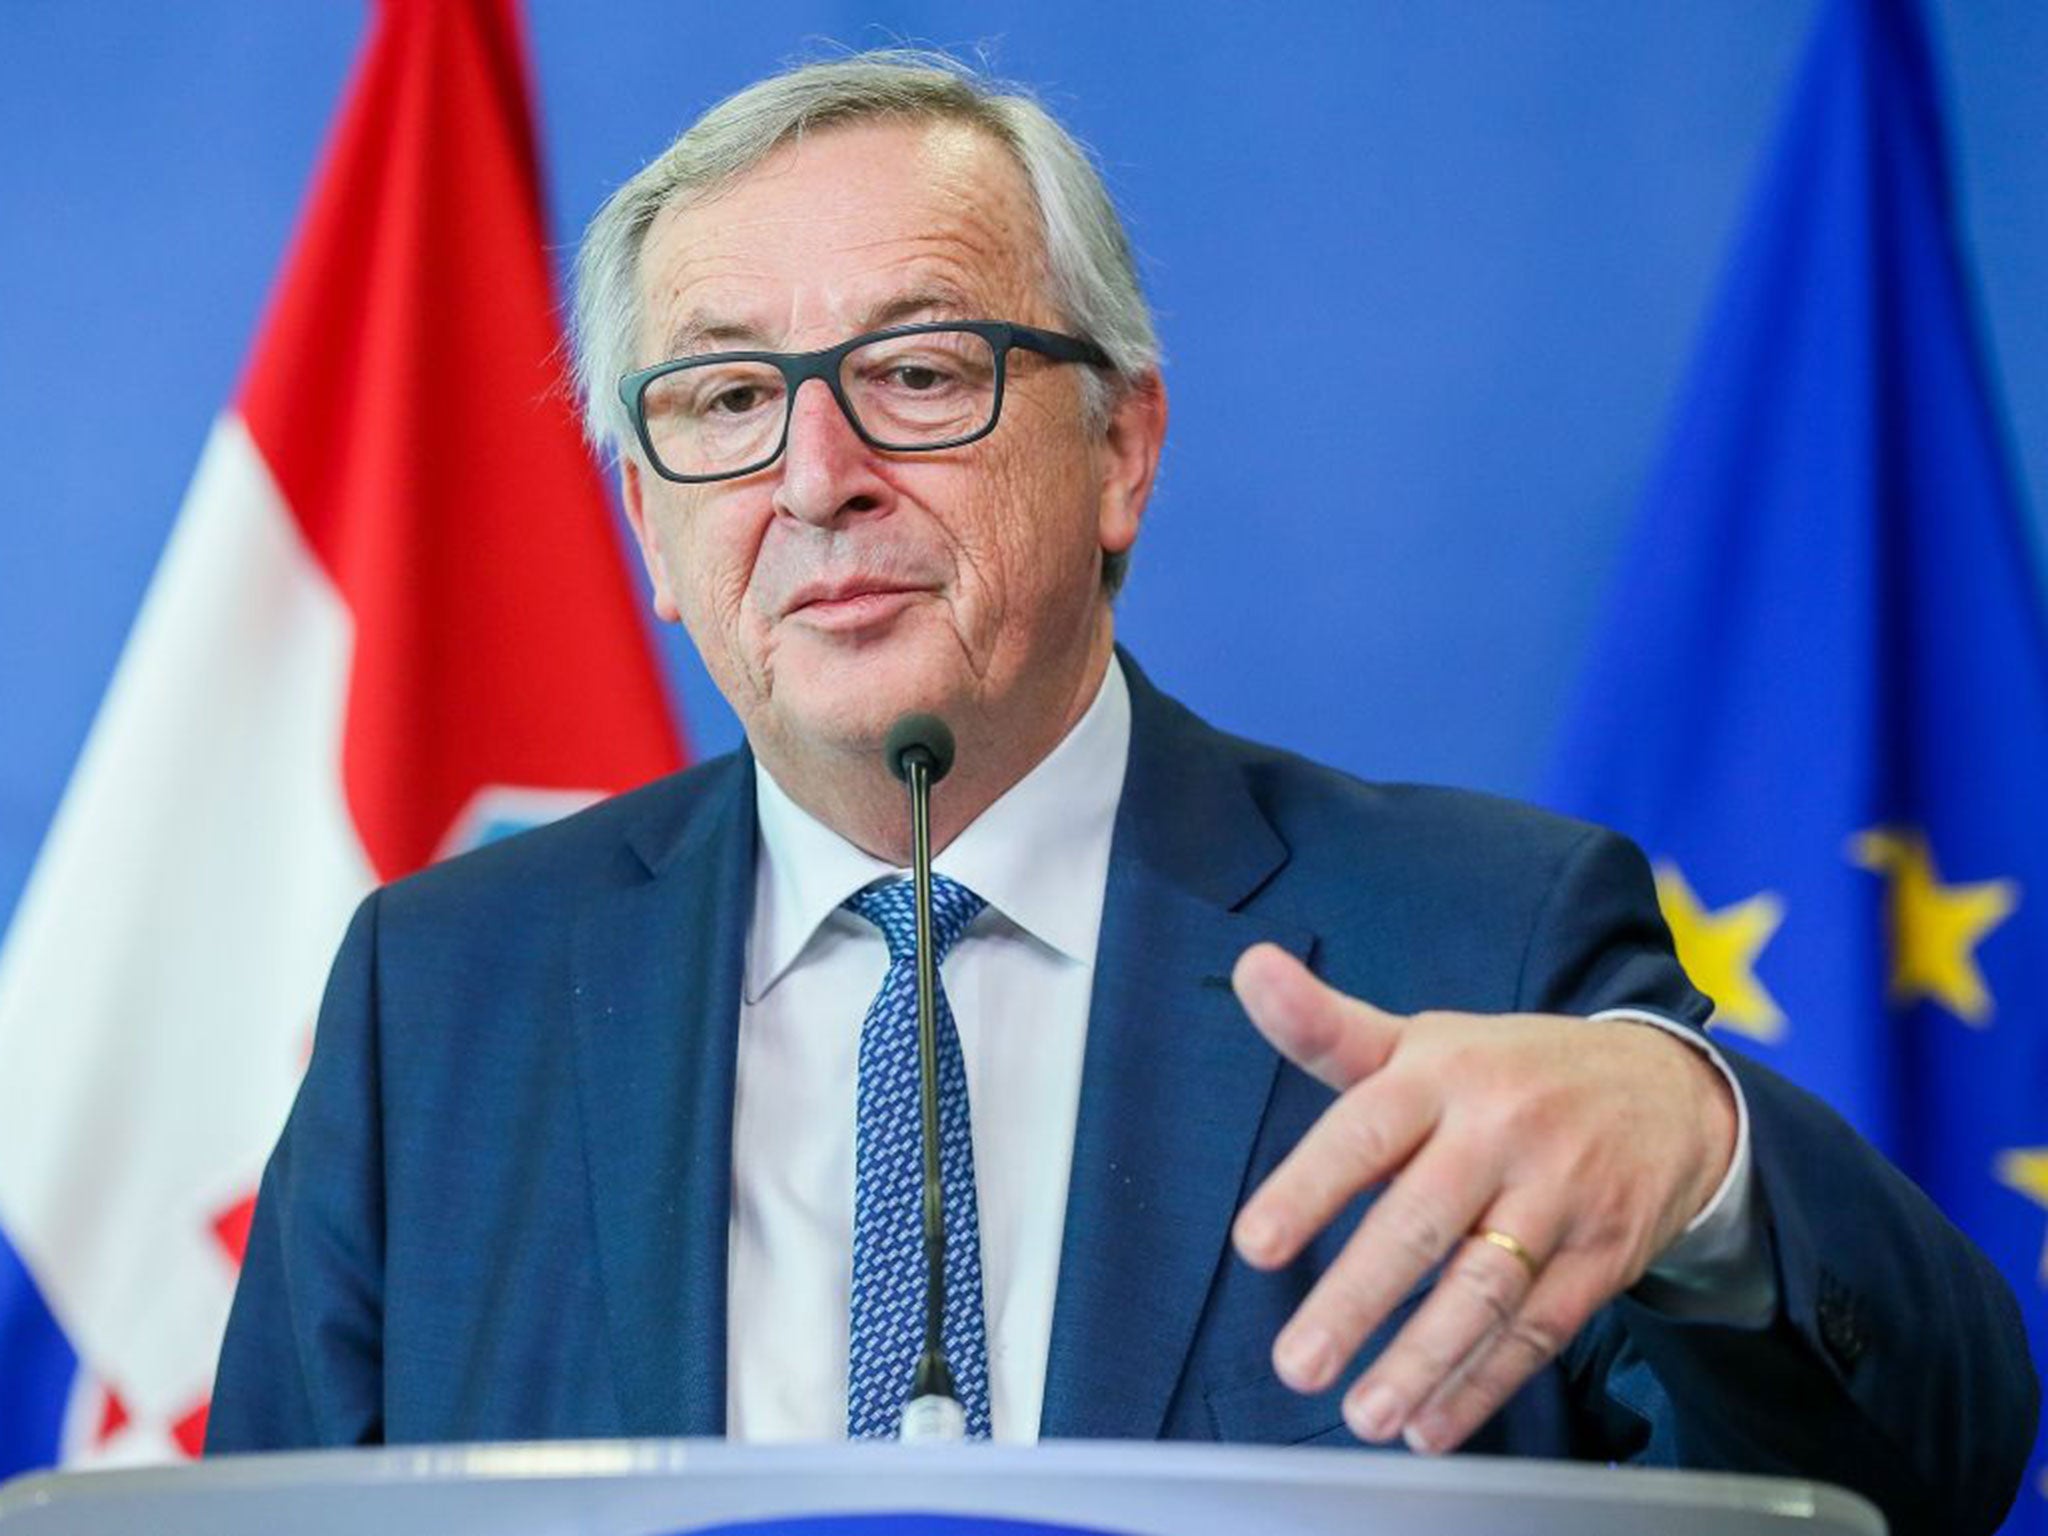 ‘Perhaps EU citizens aren’t that interested by the word ‘institutions’,’ says Juncker